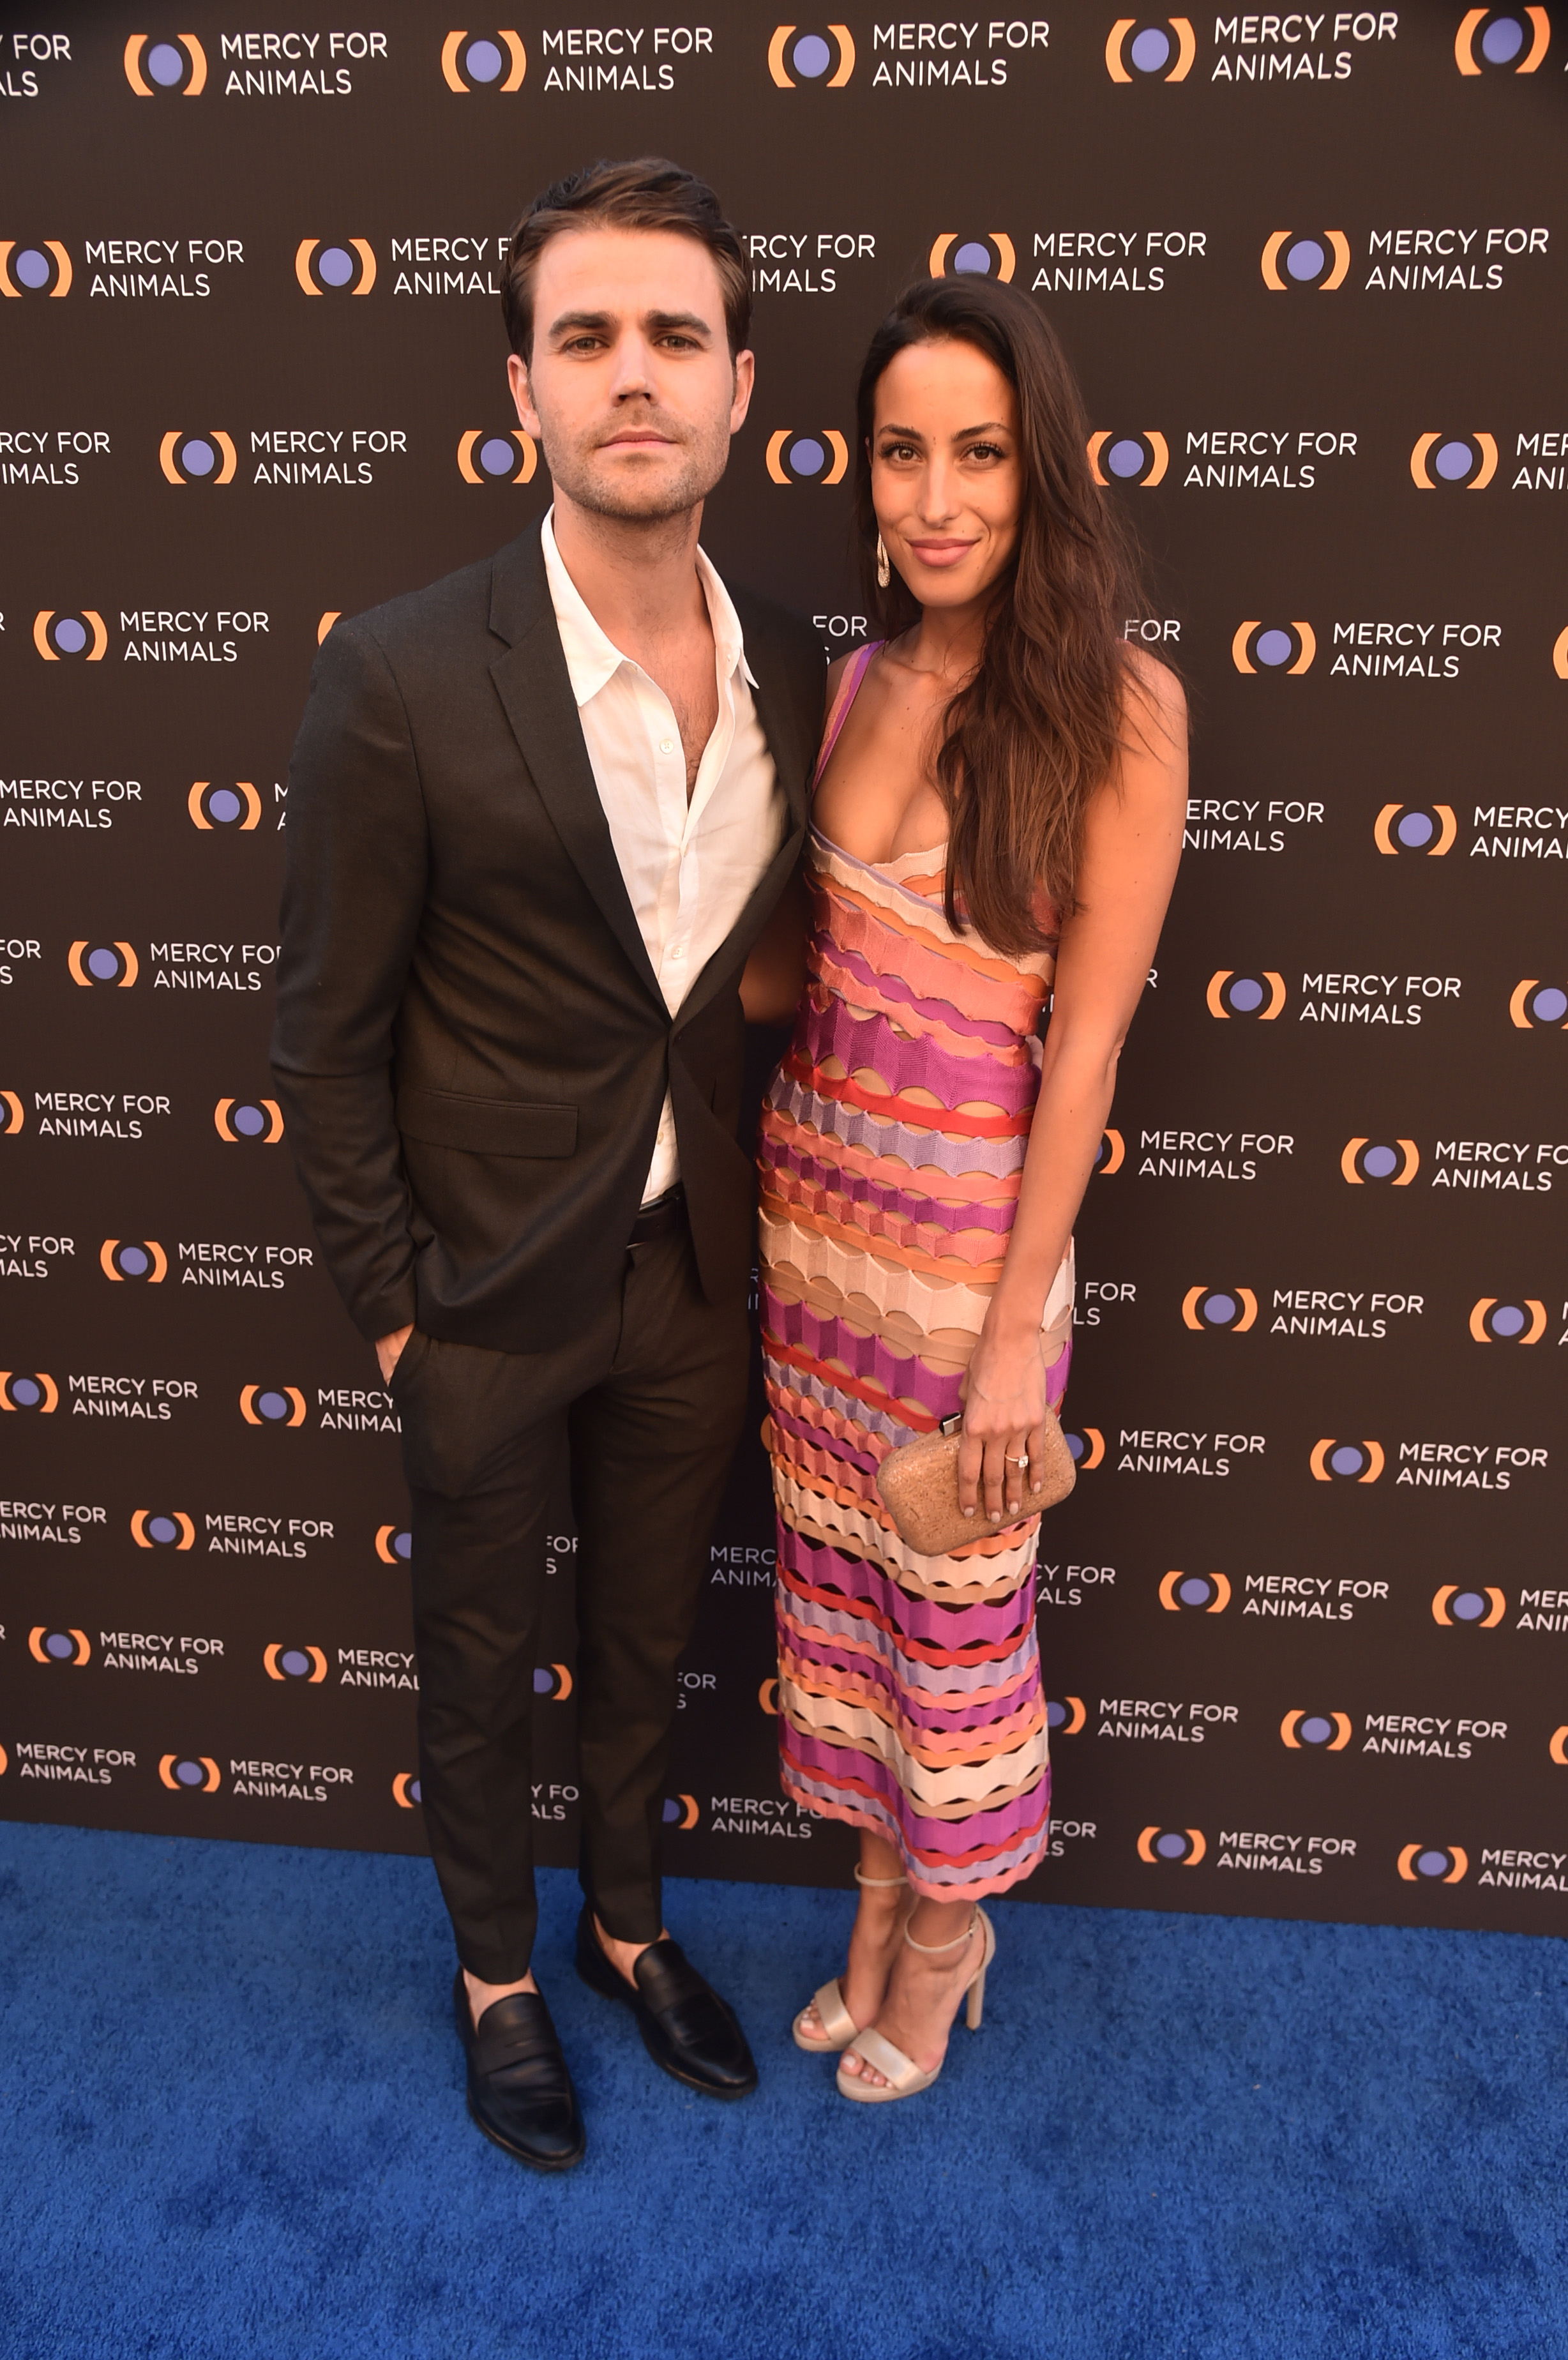 Paul Wesley and Ines de Ramon attend the Mercy For Animals 20th Anniversary Gala at The Shrine Auditorium in Los Angeles, California, on September 14, 2019. | Source: Getty Images